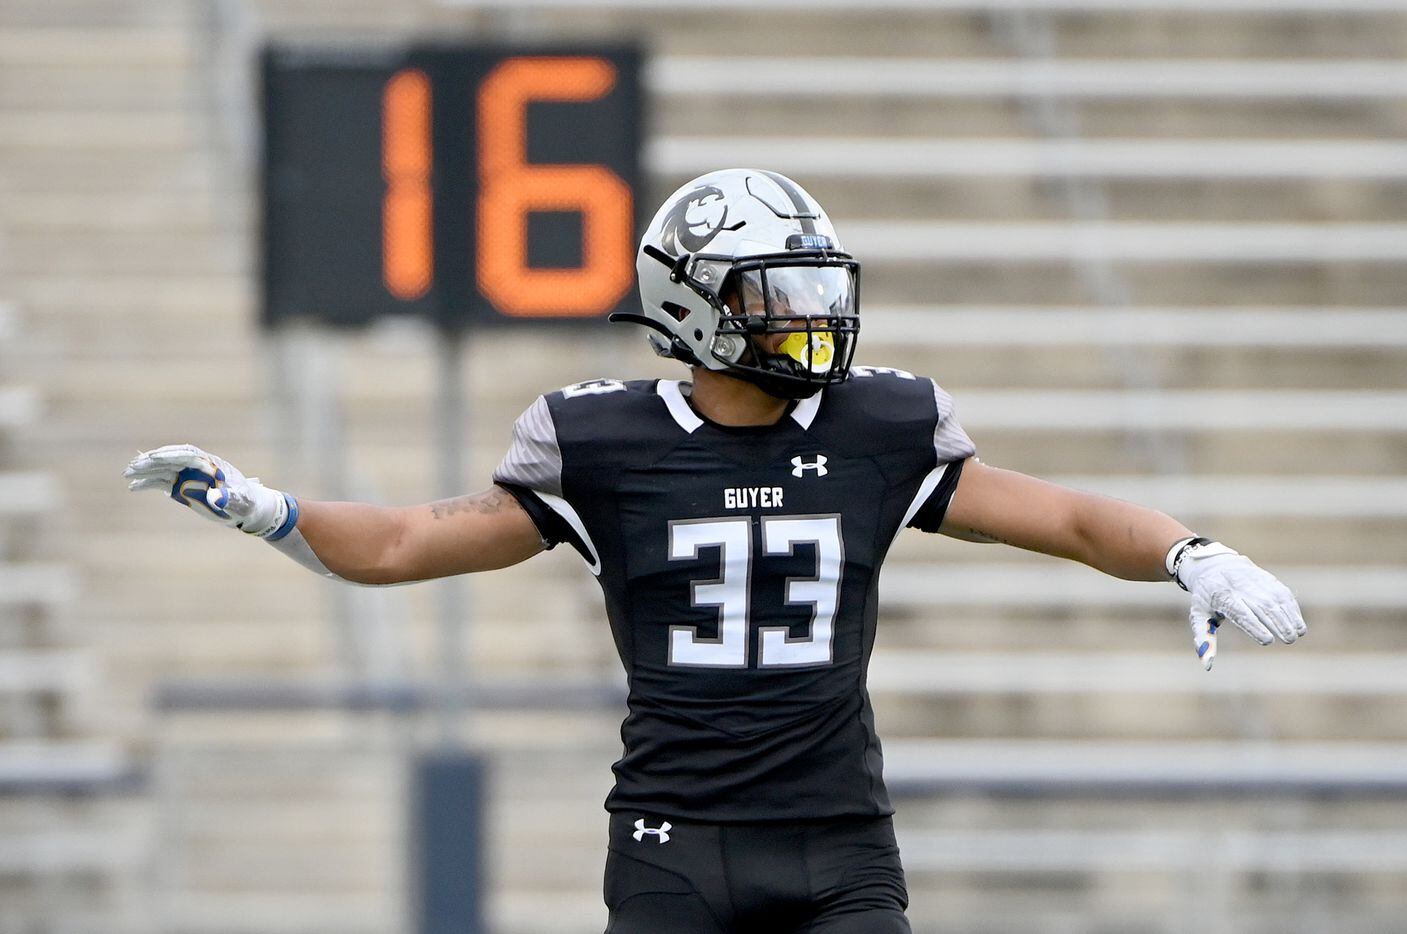 Denton Guyer's Marquan Pope (33) motions before a play in the first half of a Class 6A Division II Region I final high school playoff football game between Denton Guyer and Prosper, Saturday, Dec. 4, 2021, in Allen, Texas. Celina won 34-0. (Matt Strasen/Special Contributor)